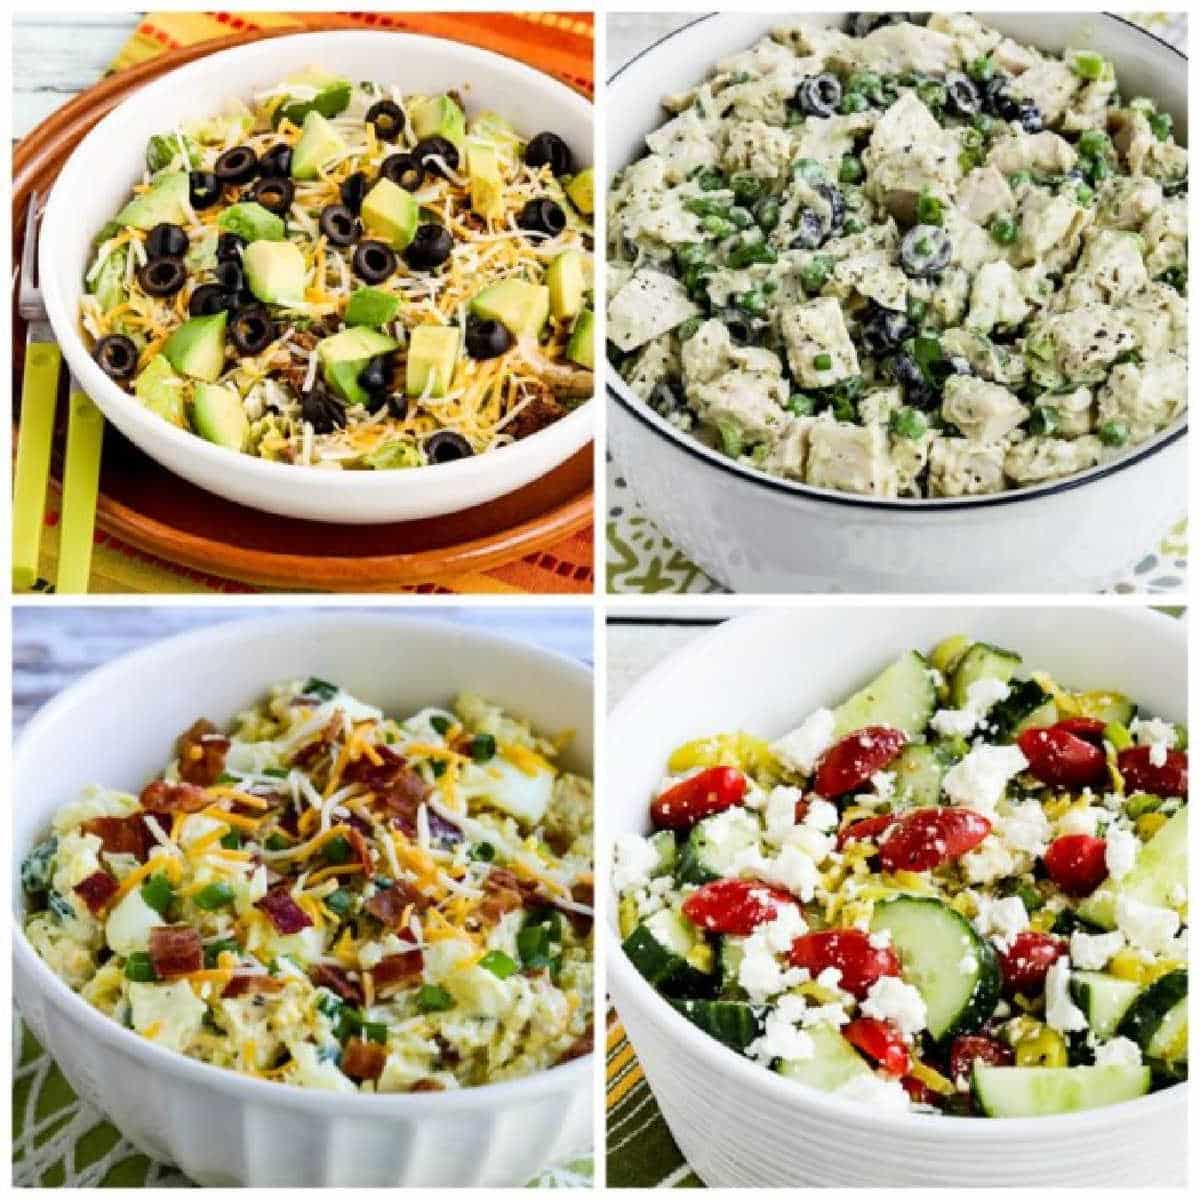 90 Healthy No-Heat Lunches for Taking to Work collage of featured recipes.